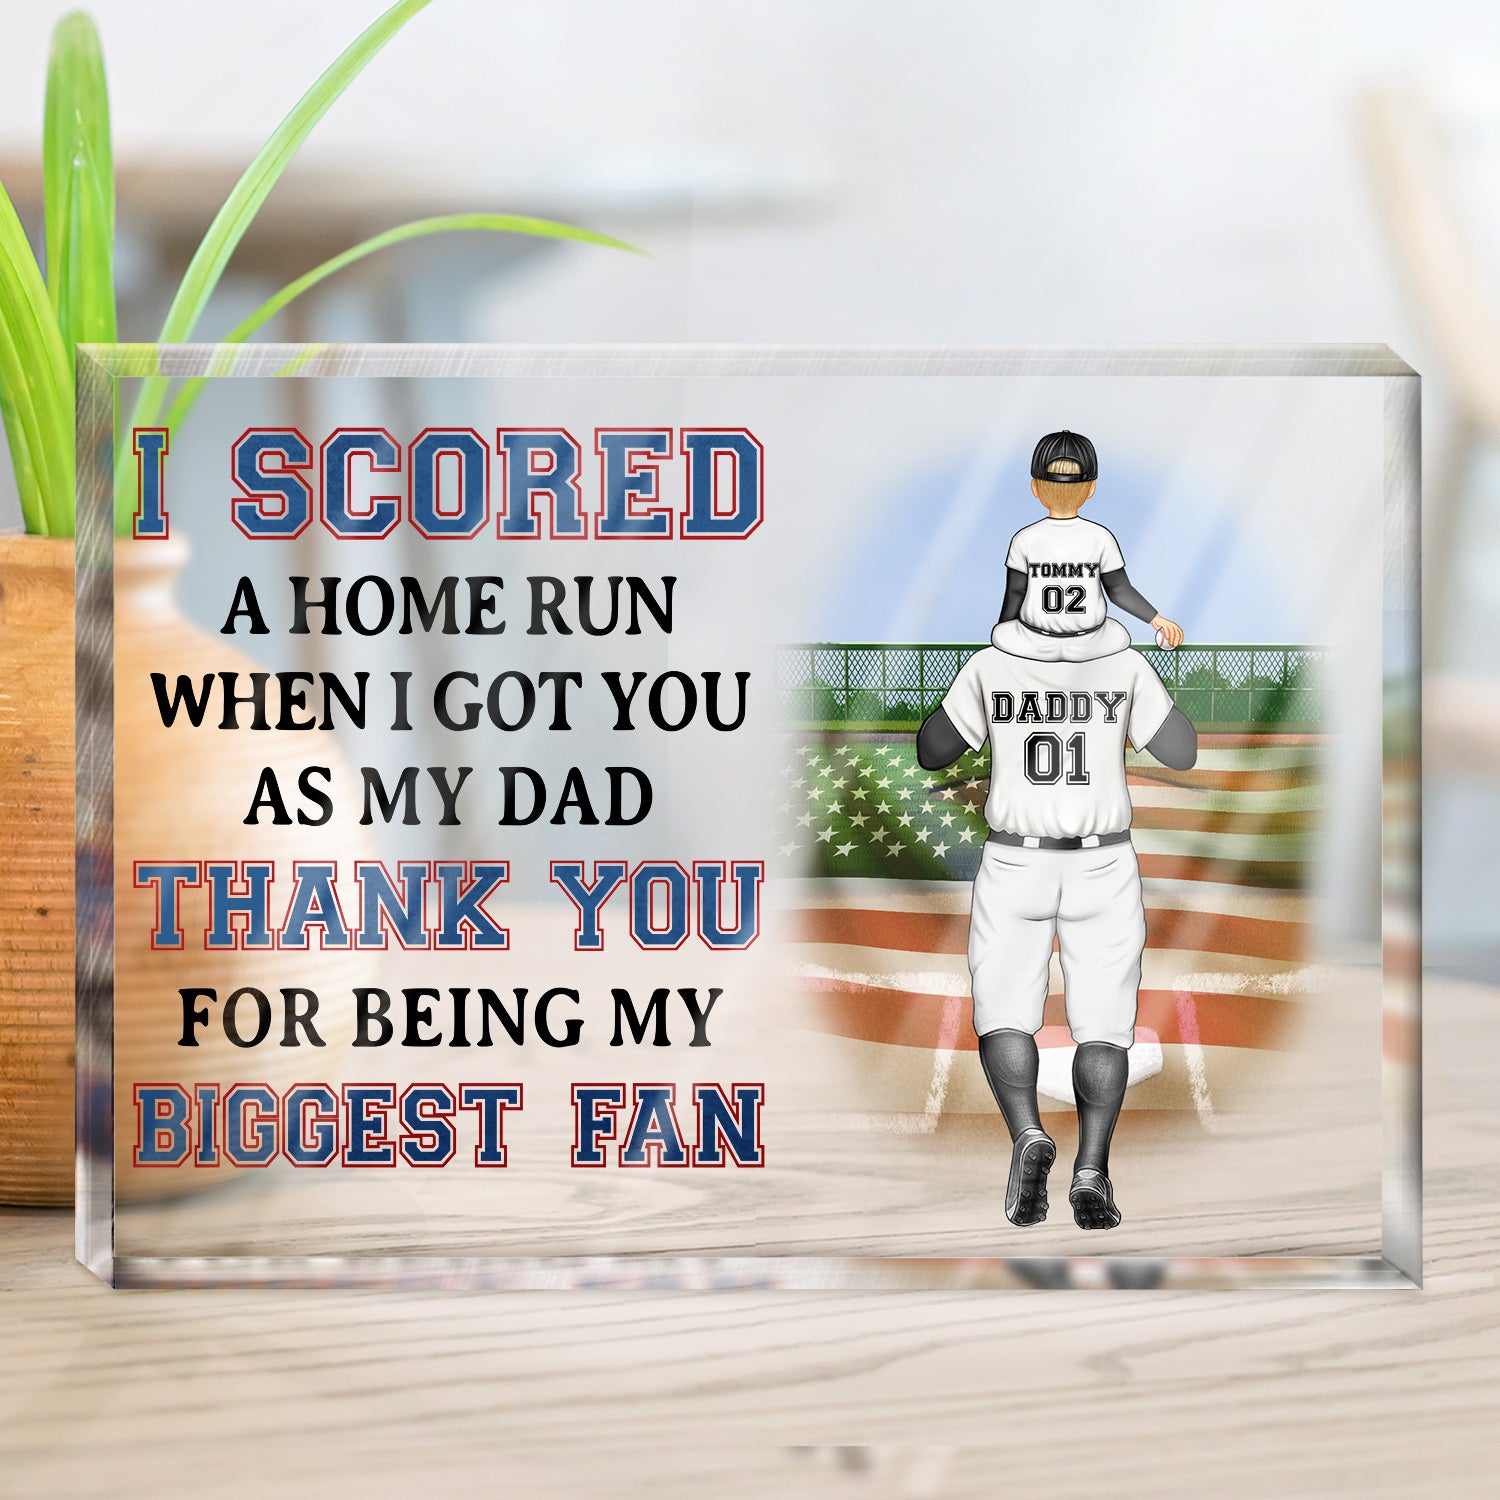 I Scored A Home Run - Birthday, Loving Gift For Baseball Dad - Personalized Rectangle Shaped Acrylic Plaque